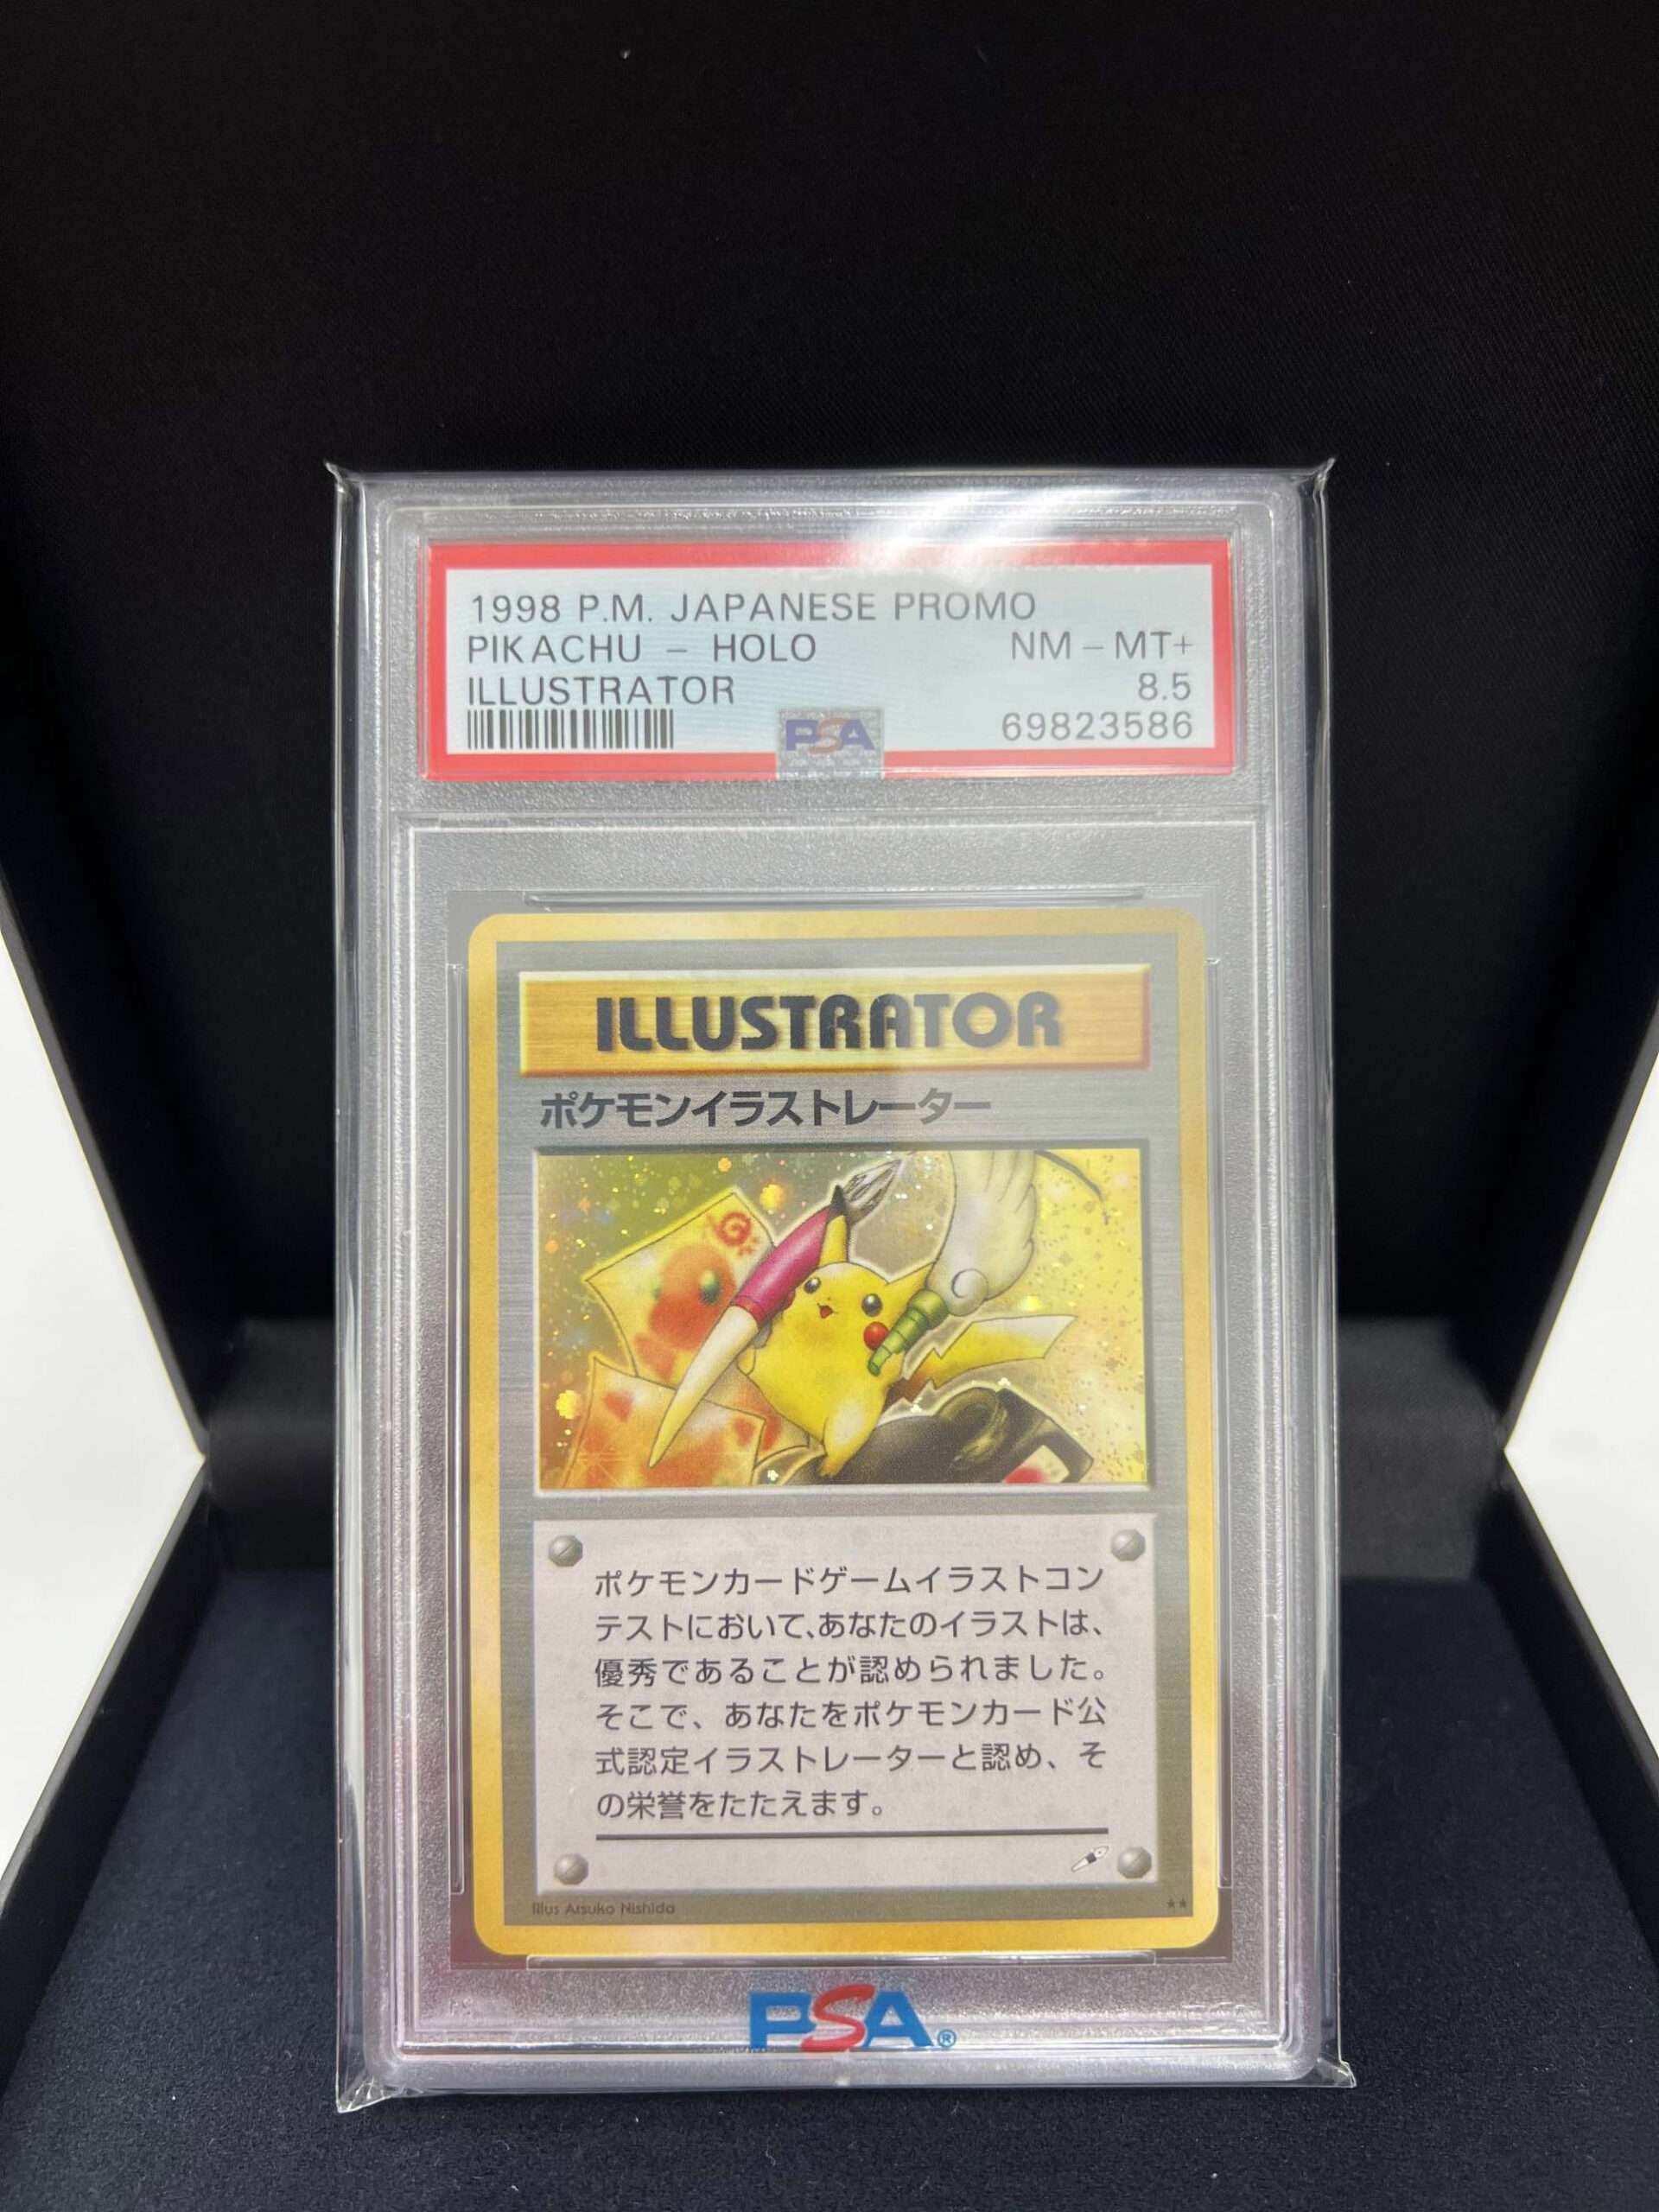 Read more about the article Collectors Pikachu Pokemon Card On Sale For Cool GBP 1.25 Million In Japan